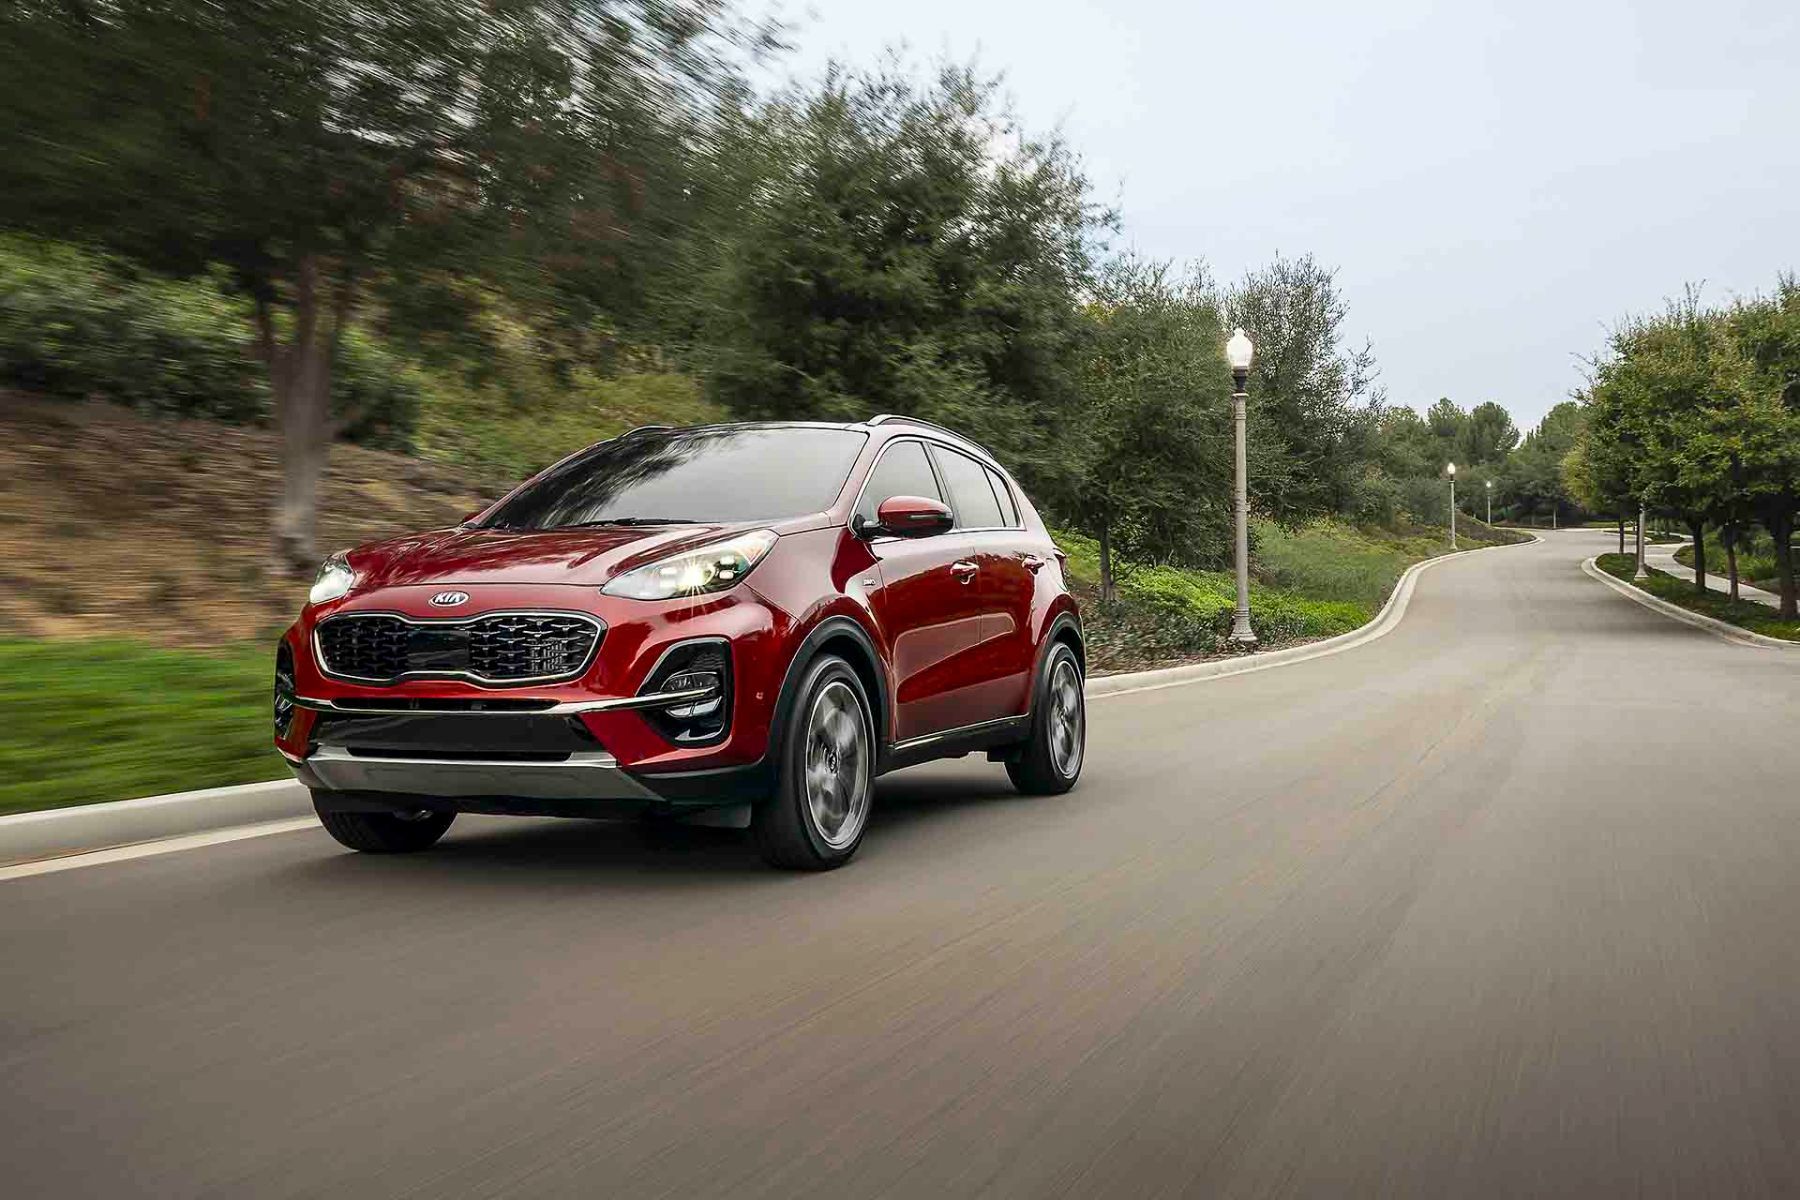 laterale front view of the 2022 Kia Sportage driving down on a road